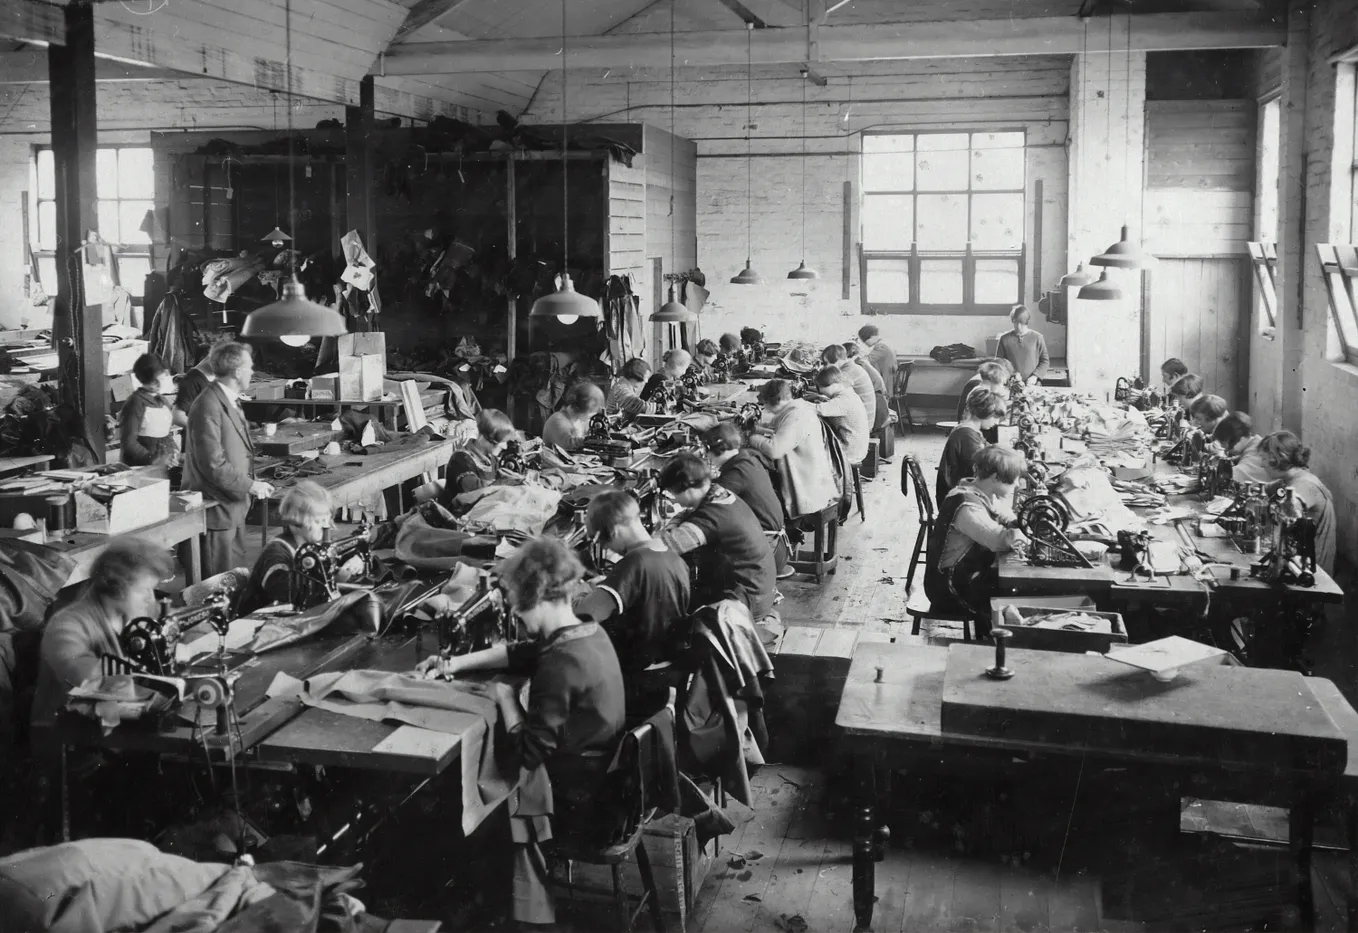 A vintage black-and-white photo of a room full of garment workers hard at work.